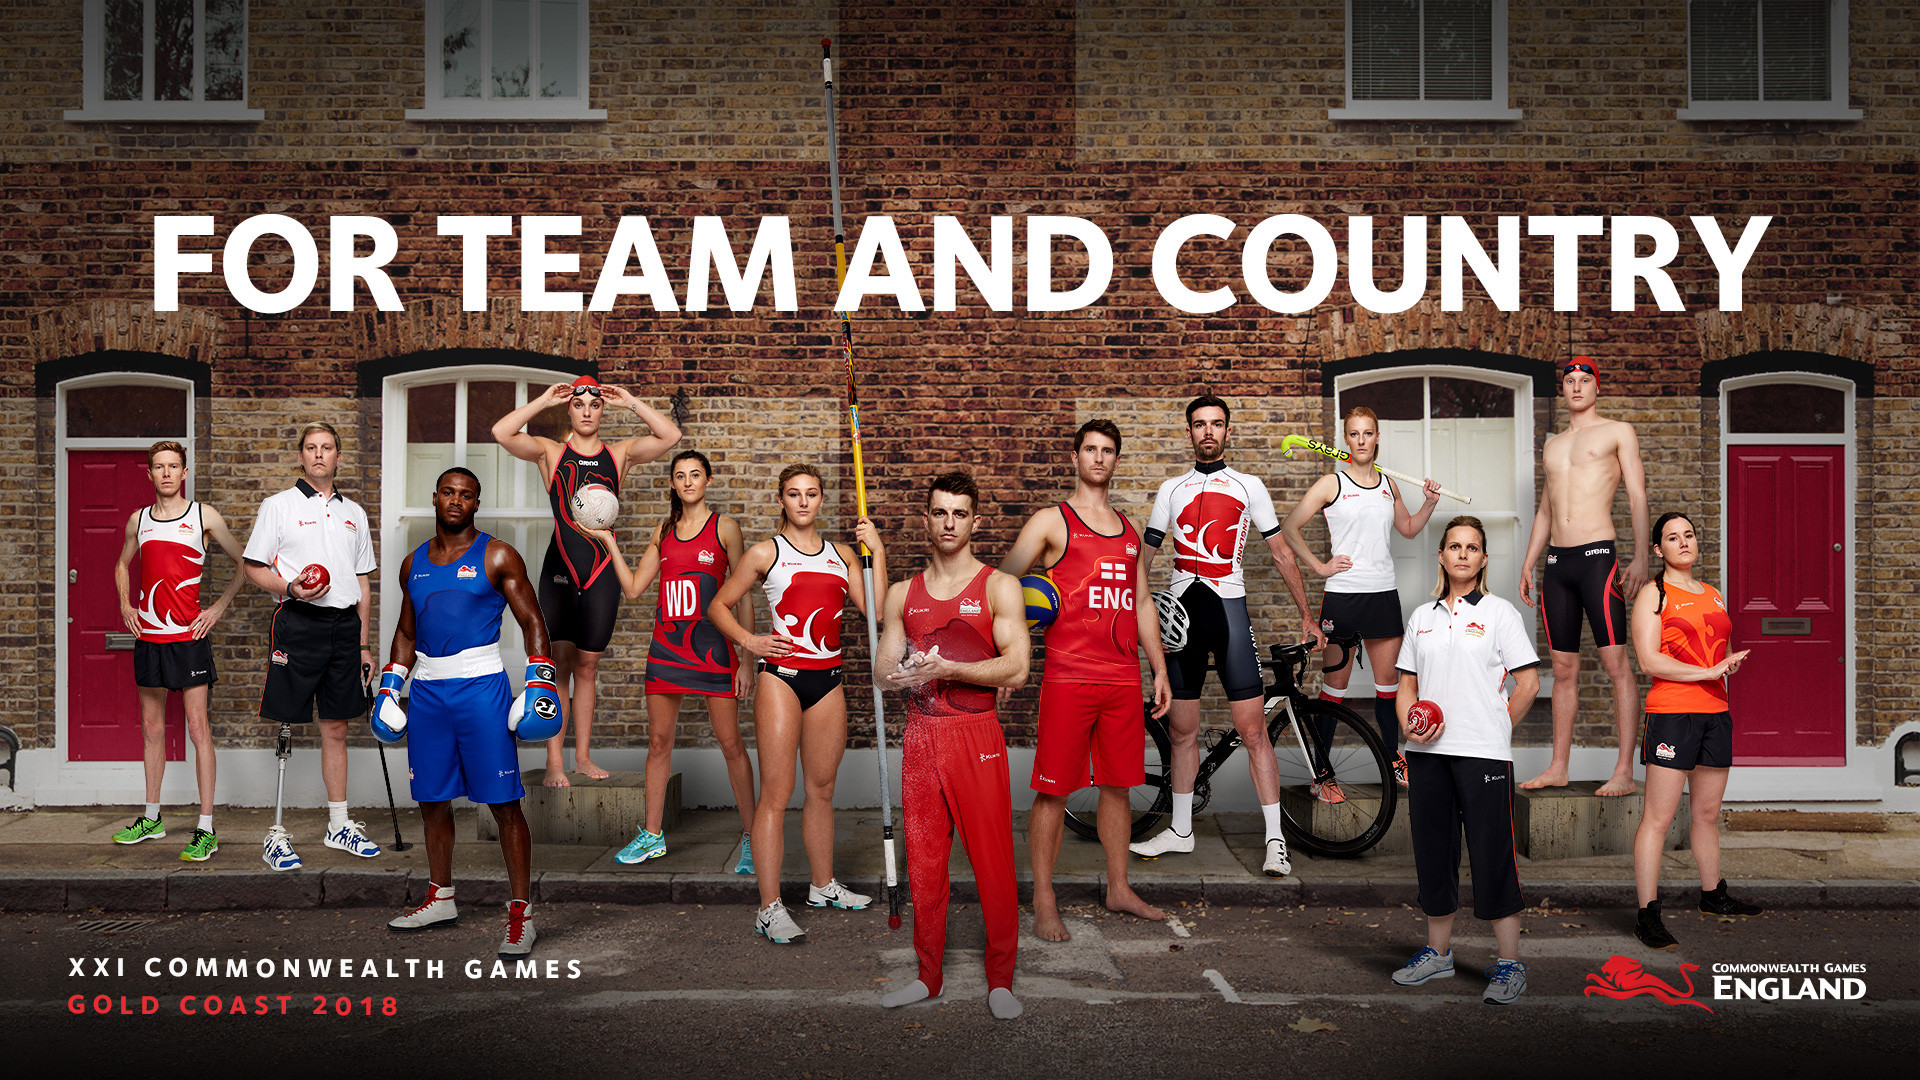 Commonwealth Games England reveal modern and rebranded team kit for Gold Coast 2018